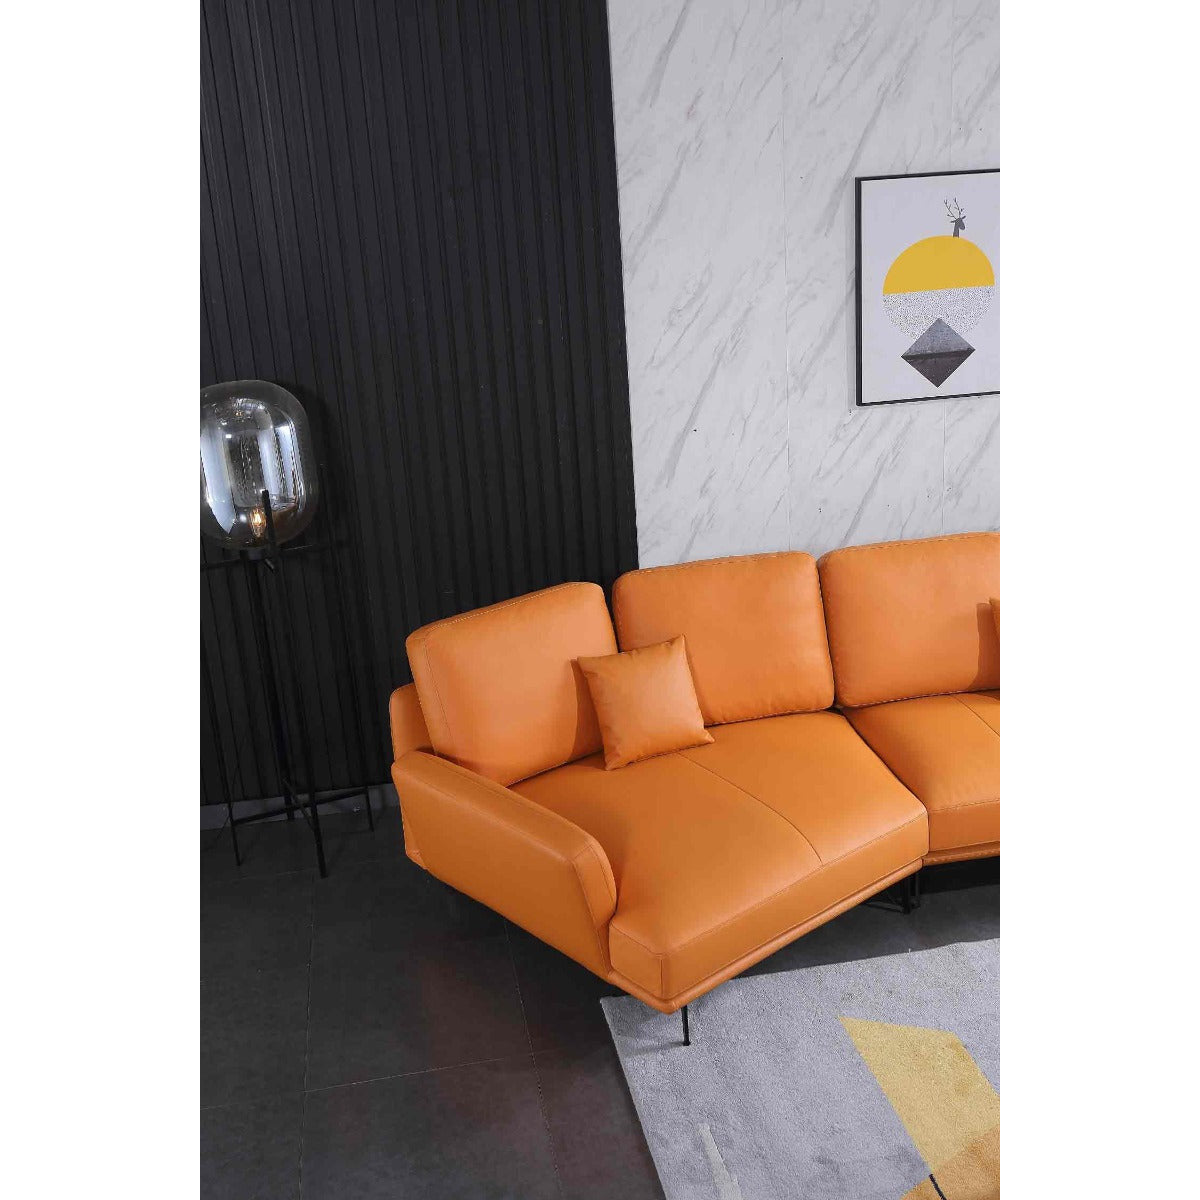 European Furniture - Galaxy Left Hand Chaise Sectional in Smokey Orange - 54431L-3LHC - New Star Living